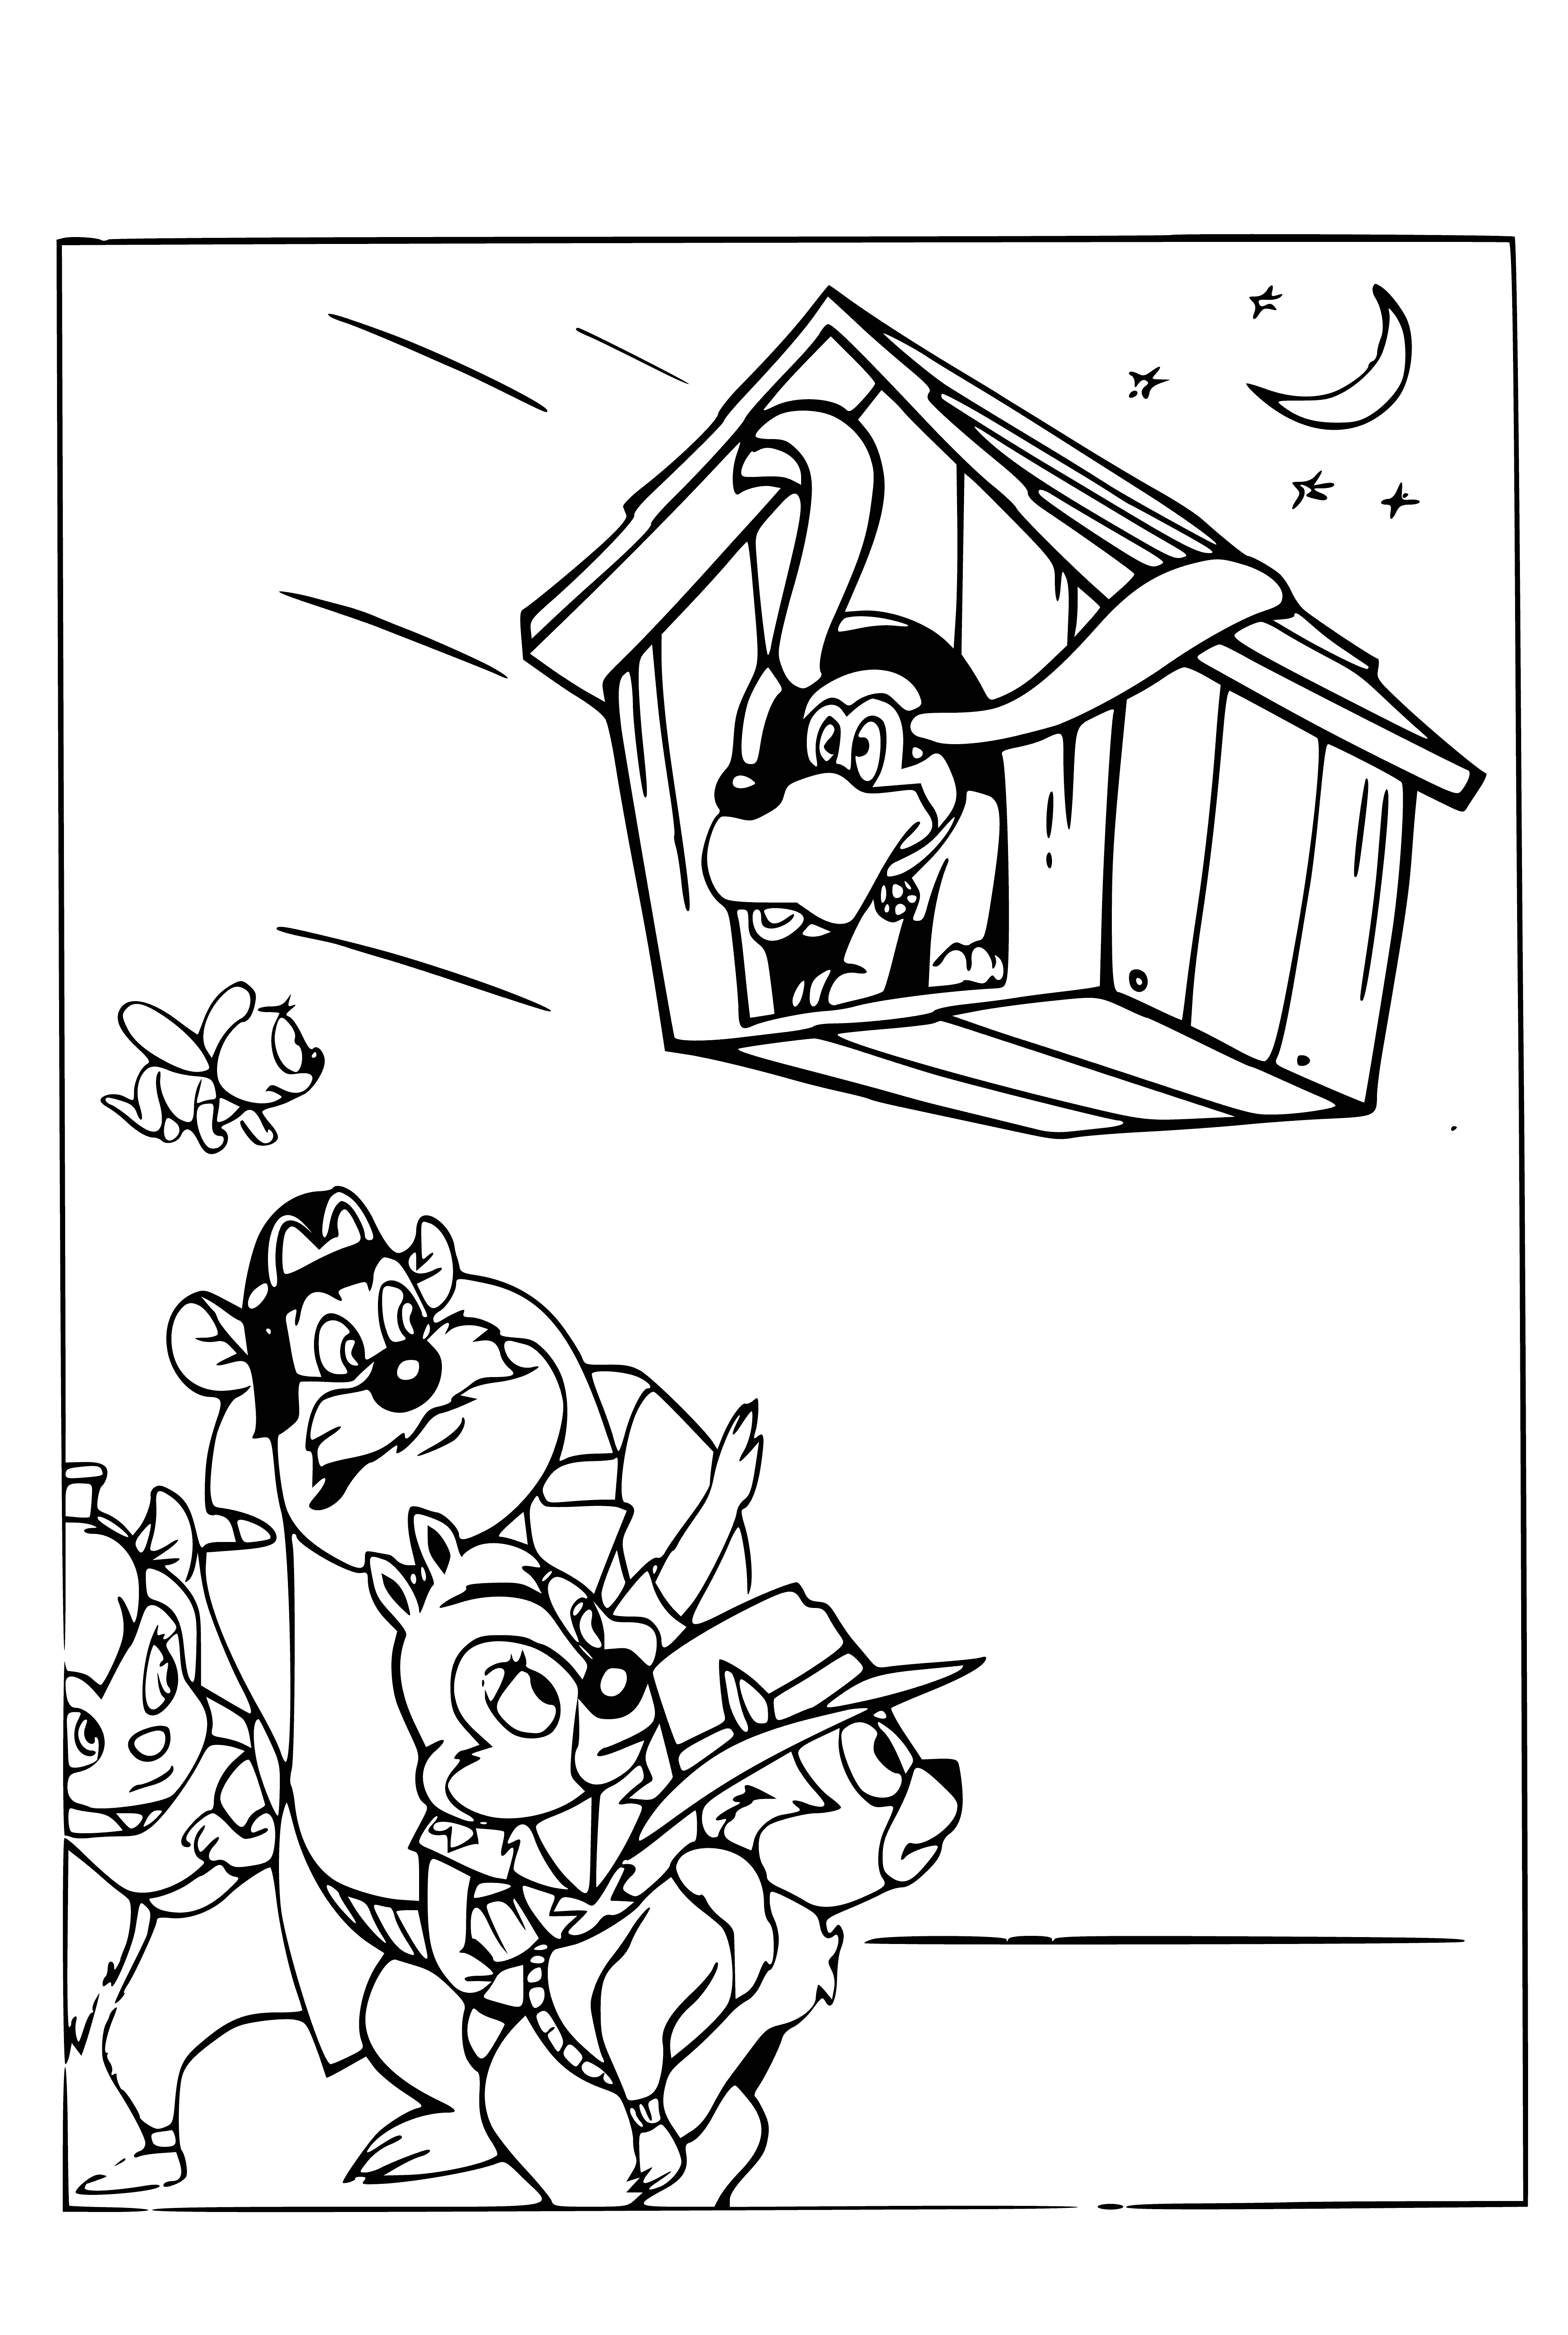 coloring page: Chipmunk & squirrel stand atop a flying kennel, looking down into it. #adventuretime